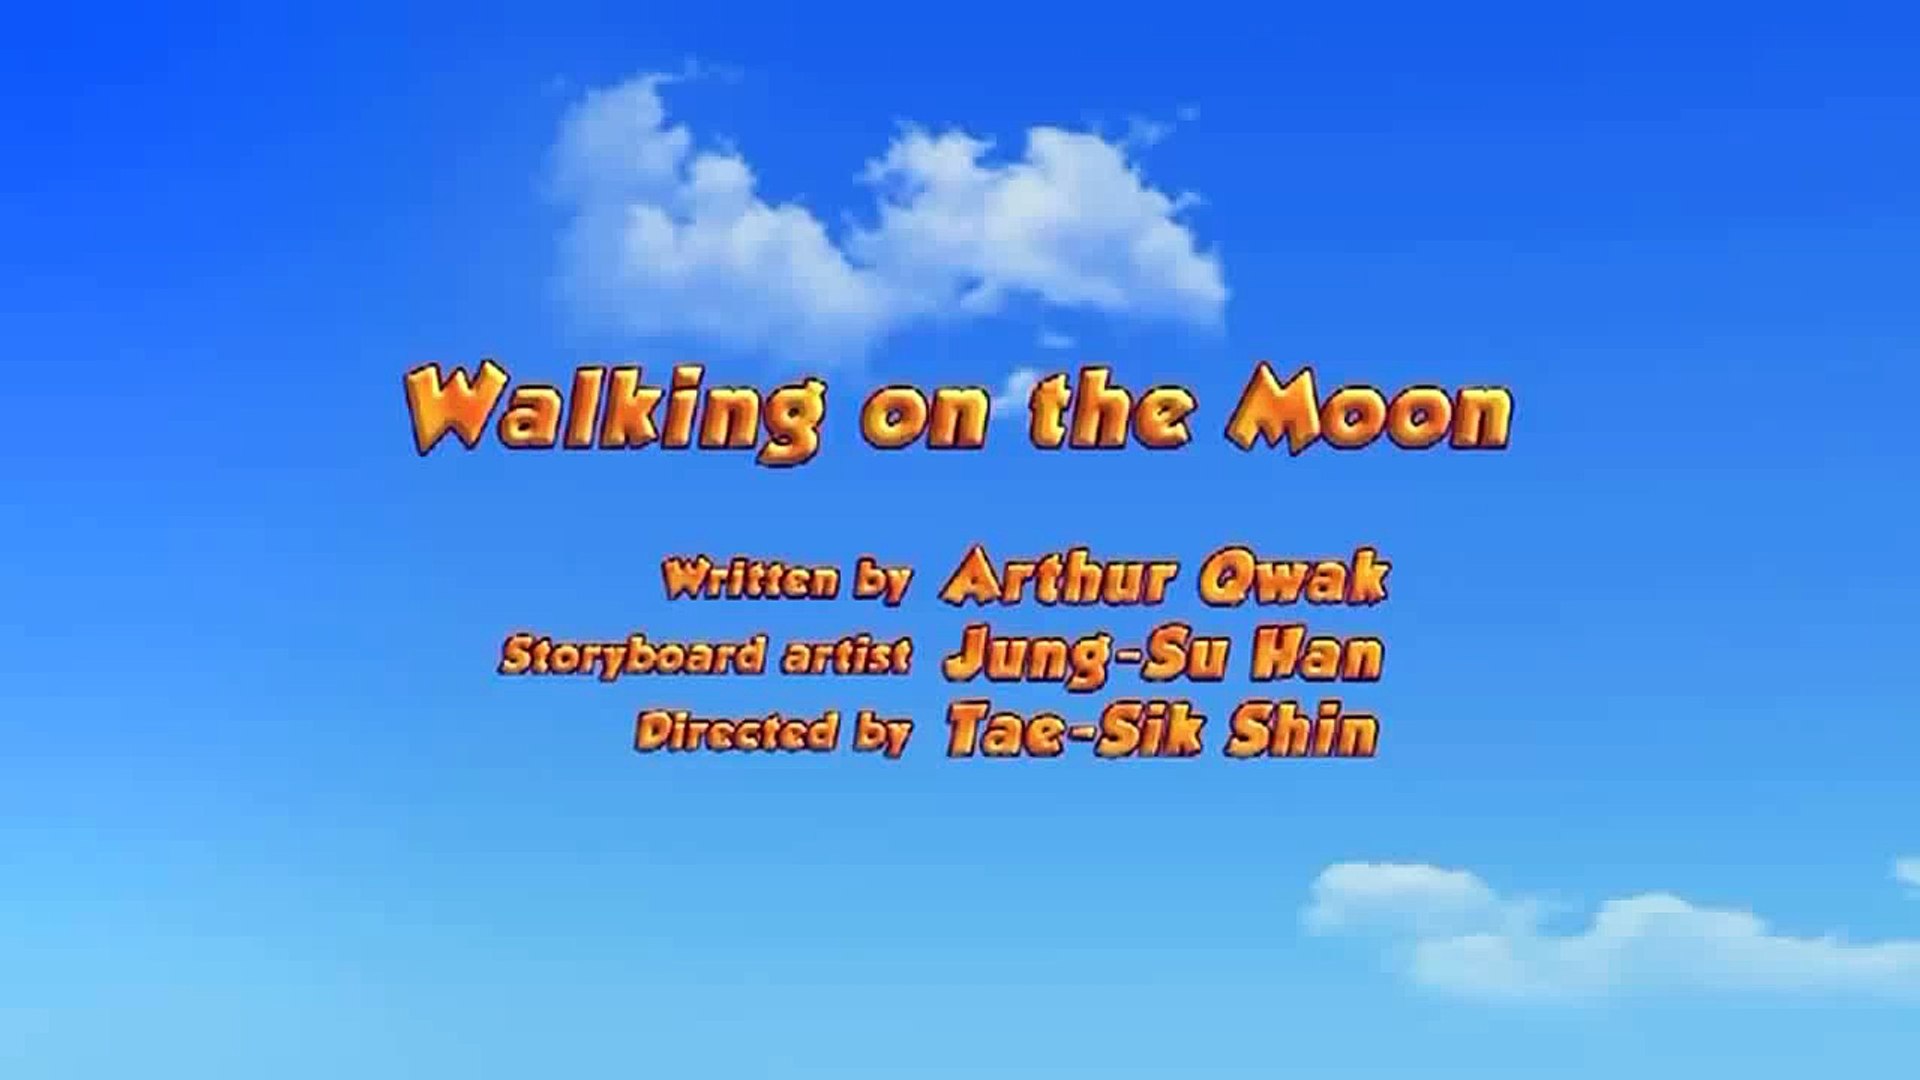 Oscar's Oasis  Ep 08 Walking on the Moon (First appearance of the Meerkats)